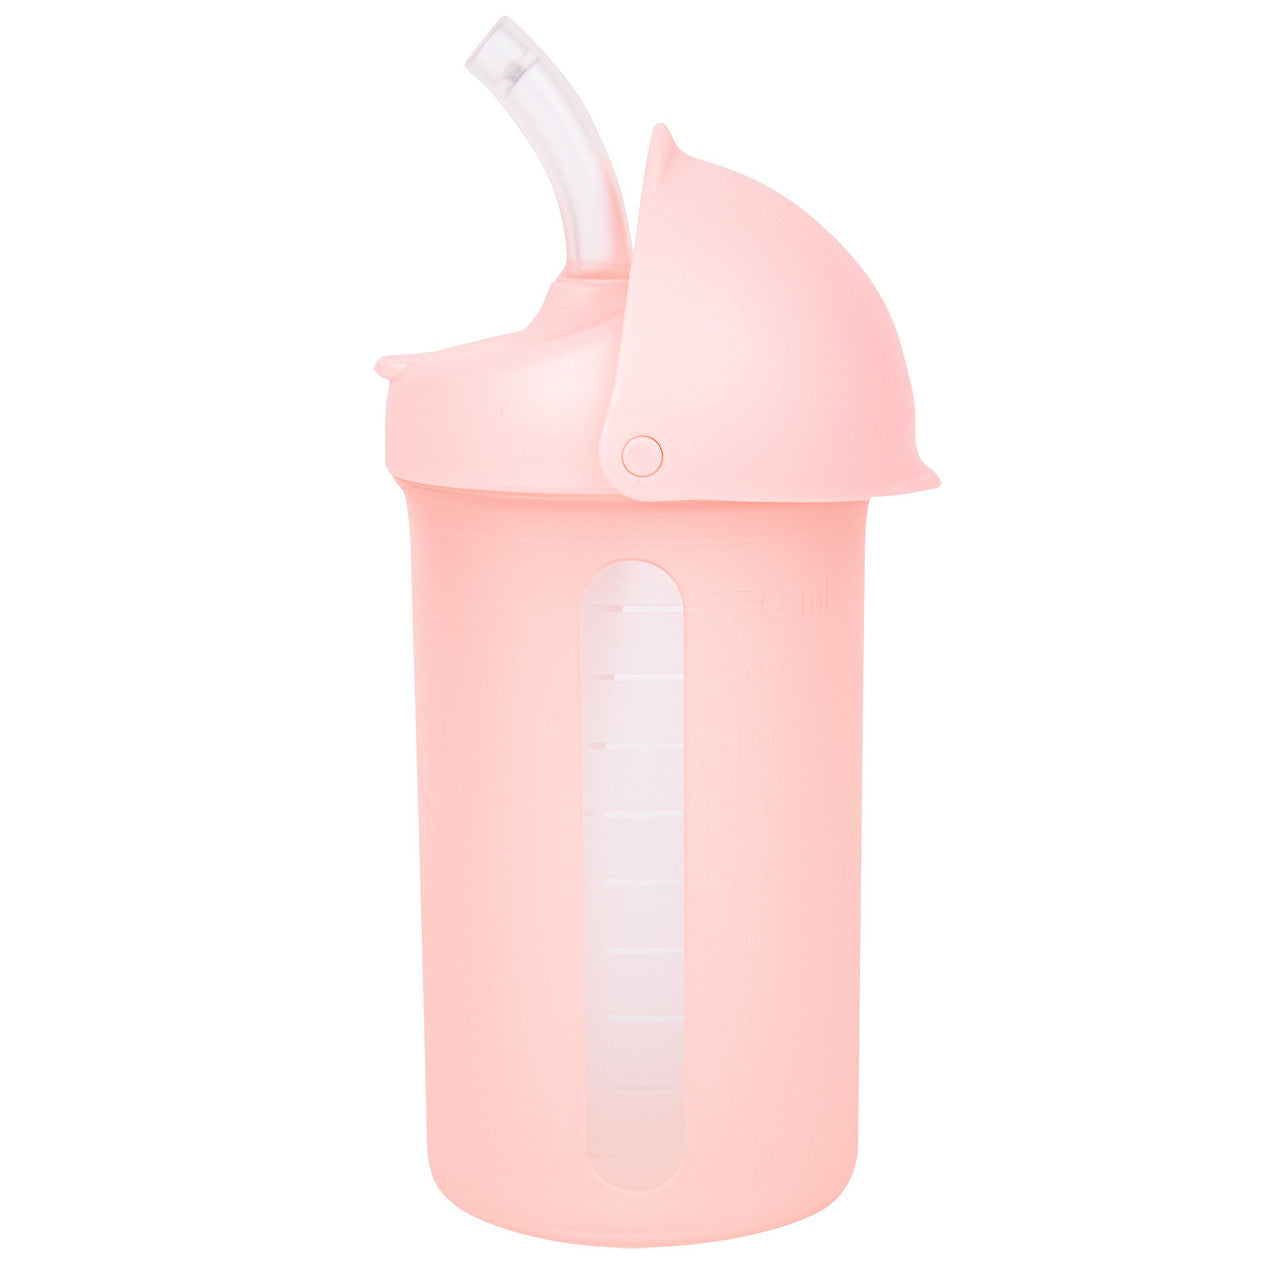 Boon Snug Lids Straws & Cup Universal Silicone Lids Pink